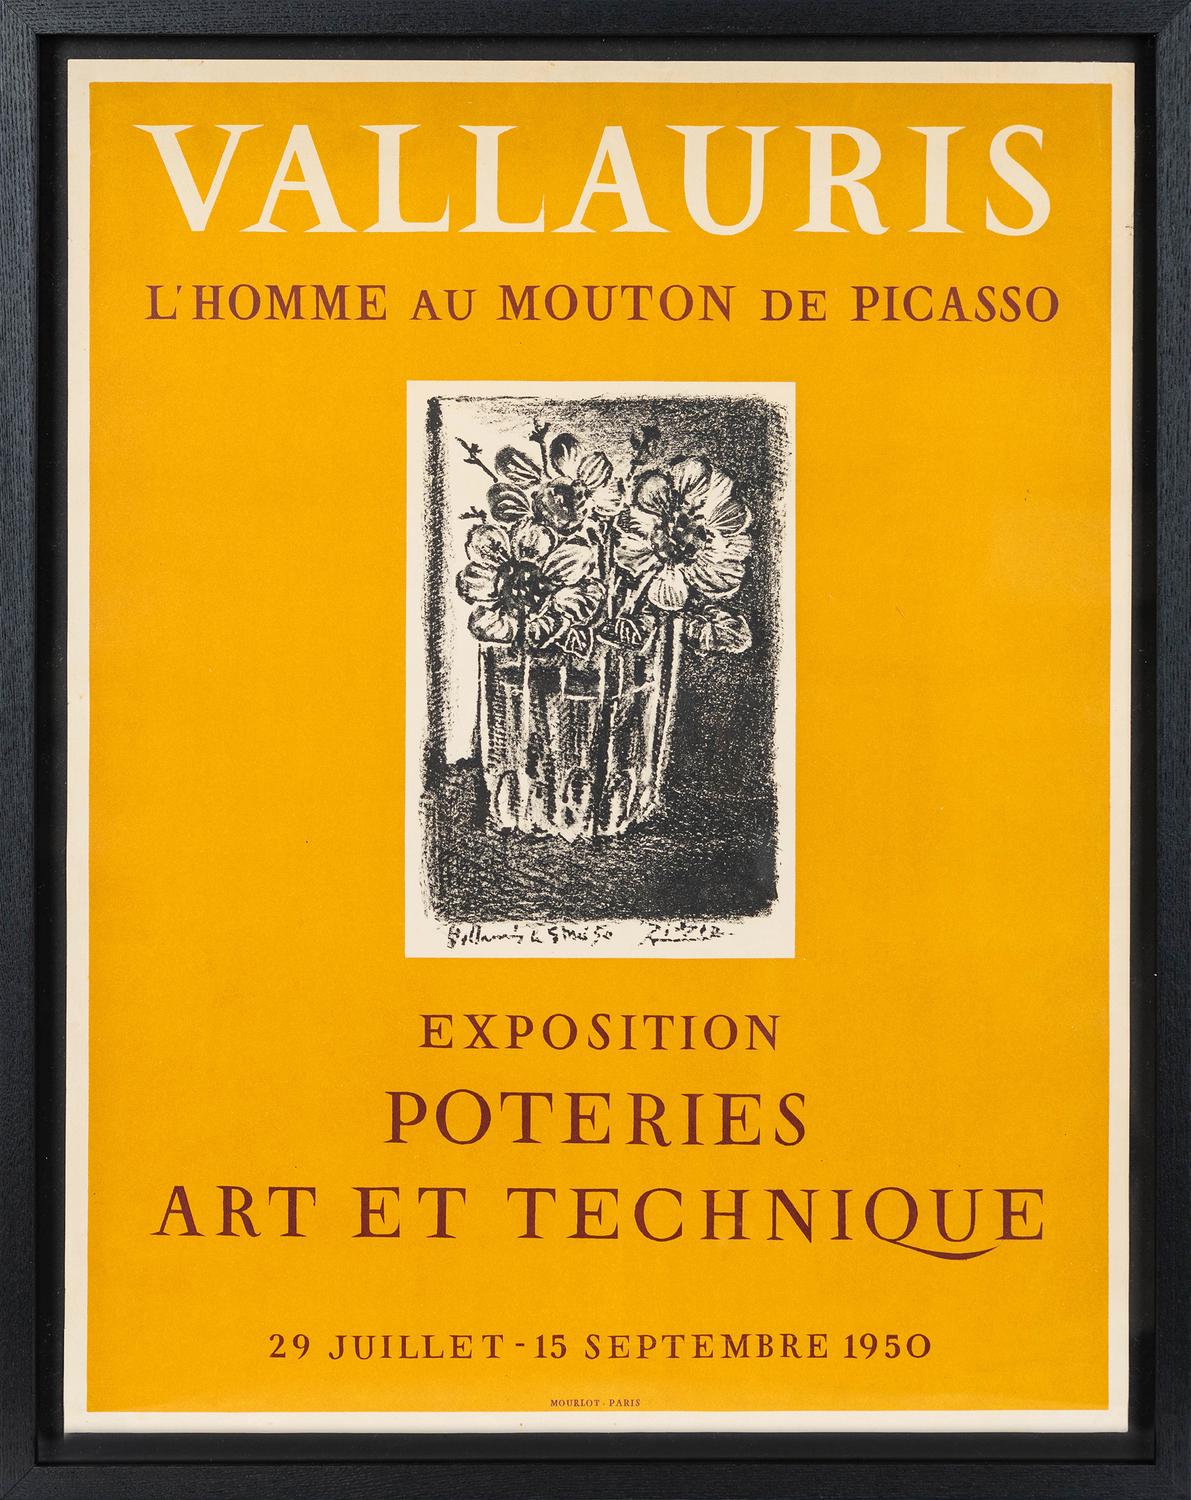 Vallauris Exposition Poteries, 1950